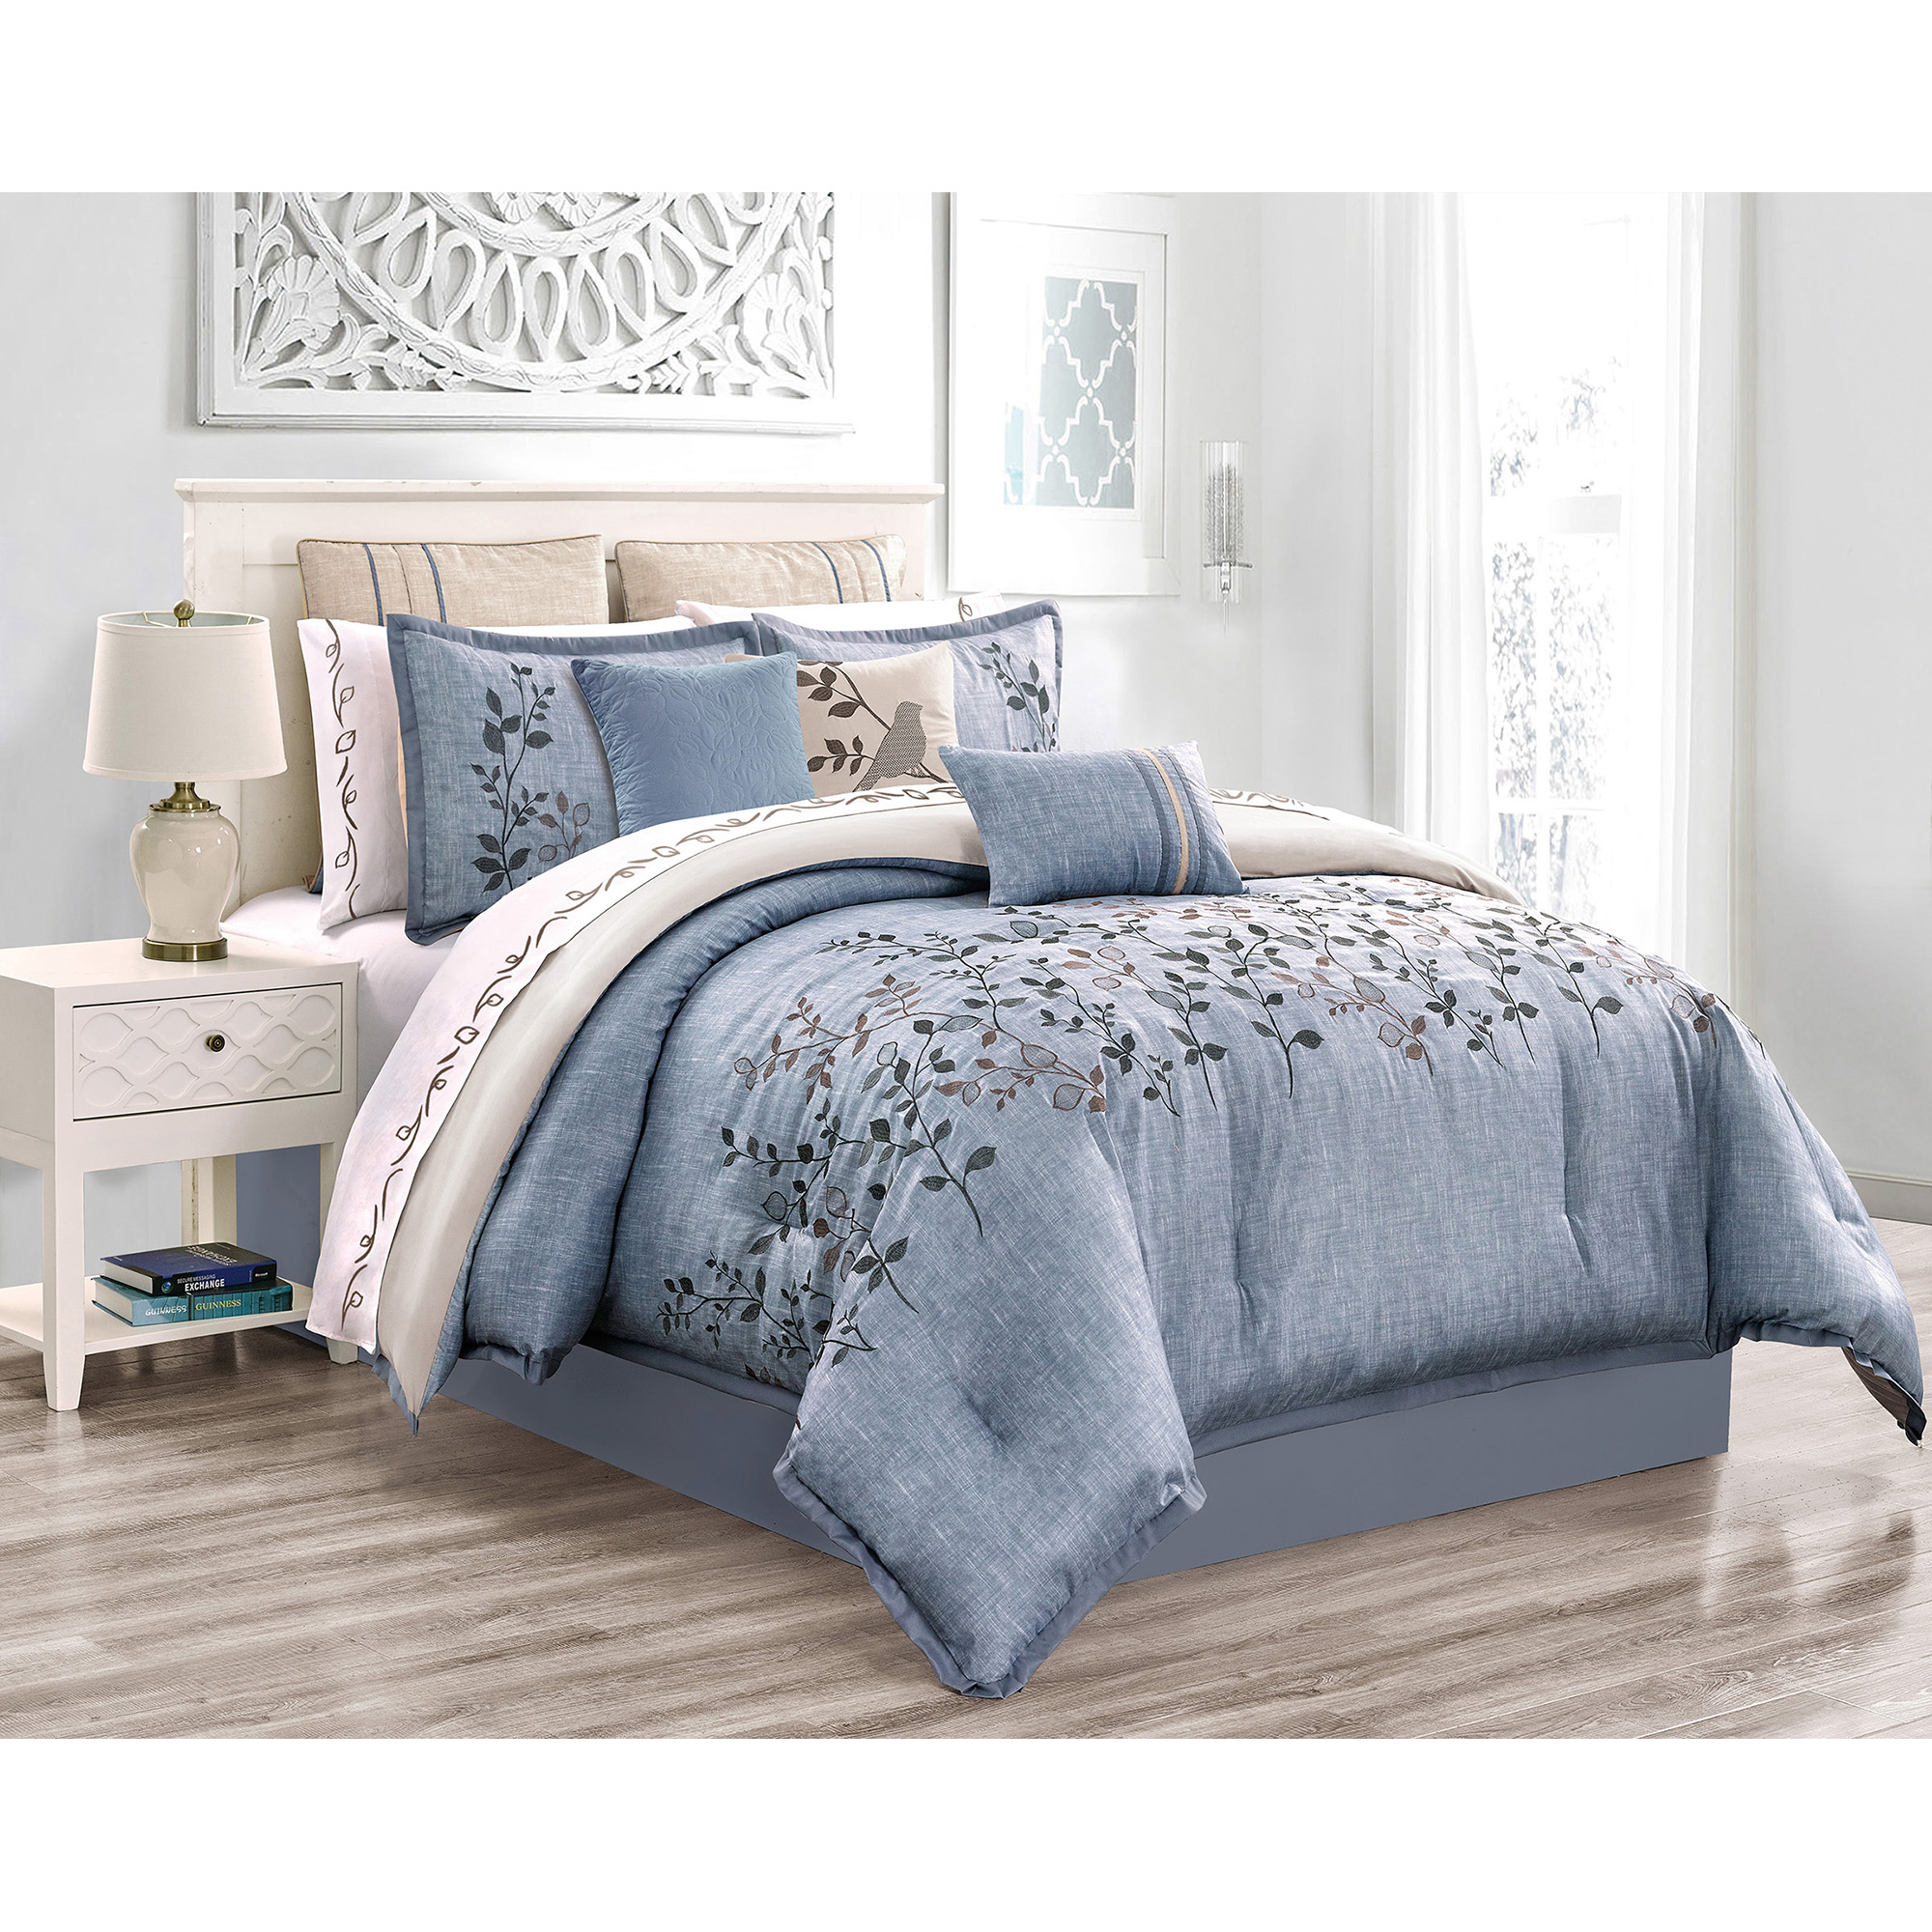 S019 ENYA QUEEN SIZE 7 PIECE COMFORTER/2 PILLOW SHAMS/1 BED SKIRT/ 1  BREAKFAST CUSHION/ 2 SQUARE CUSHIONS BLUE SET - Standard Distributors  Limited